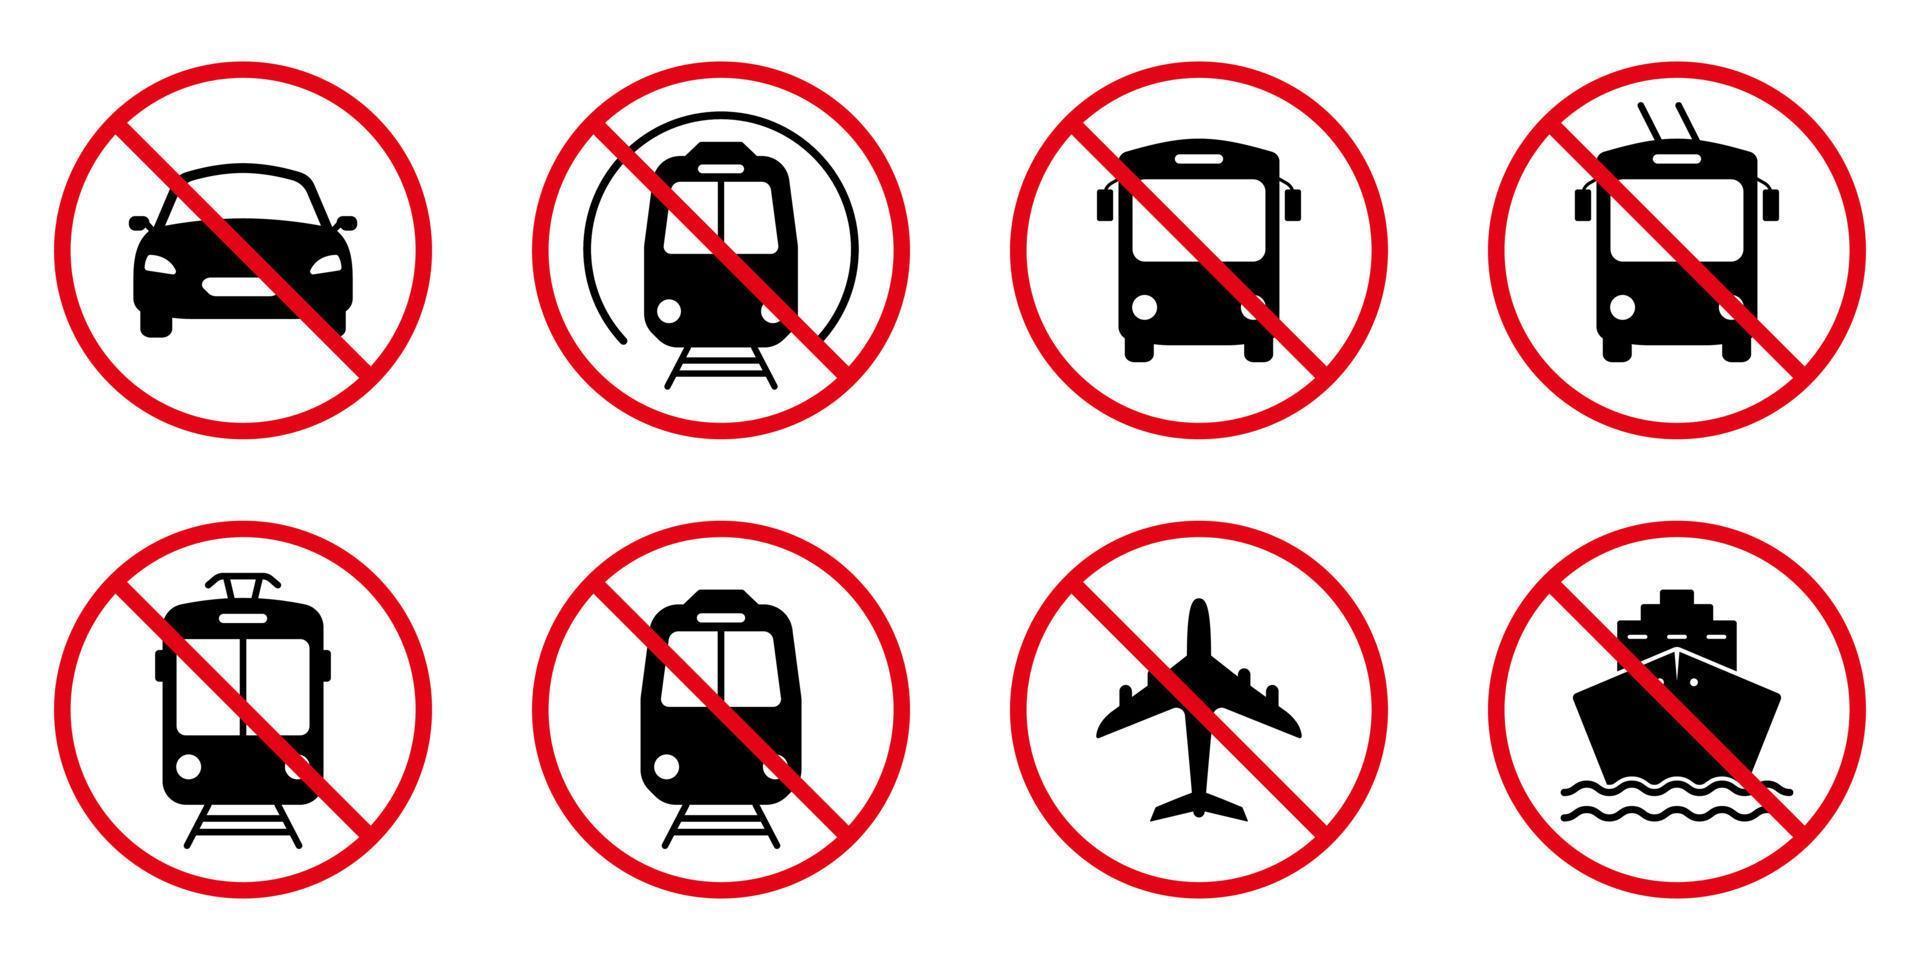 Prohibited Transport Station Black Silhouette Icon Set. Forbidden Train, Trolley, Car, Motorcycle, Tram, Bicycle, Plane, Bus, Ship Pictogram. Road Red Stop Circle Symbol. Isolated Vector Illustration.